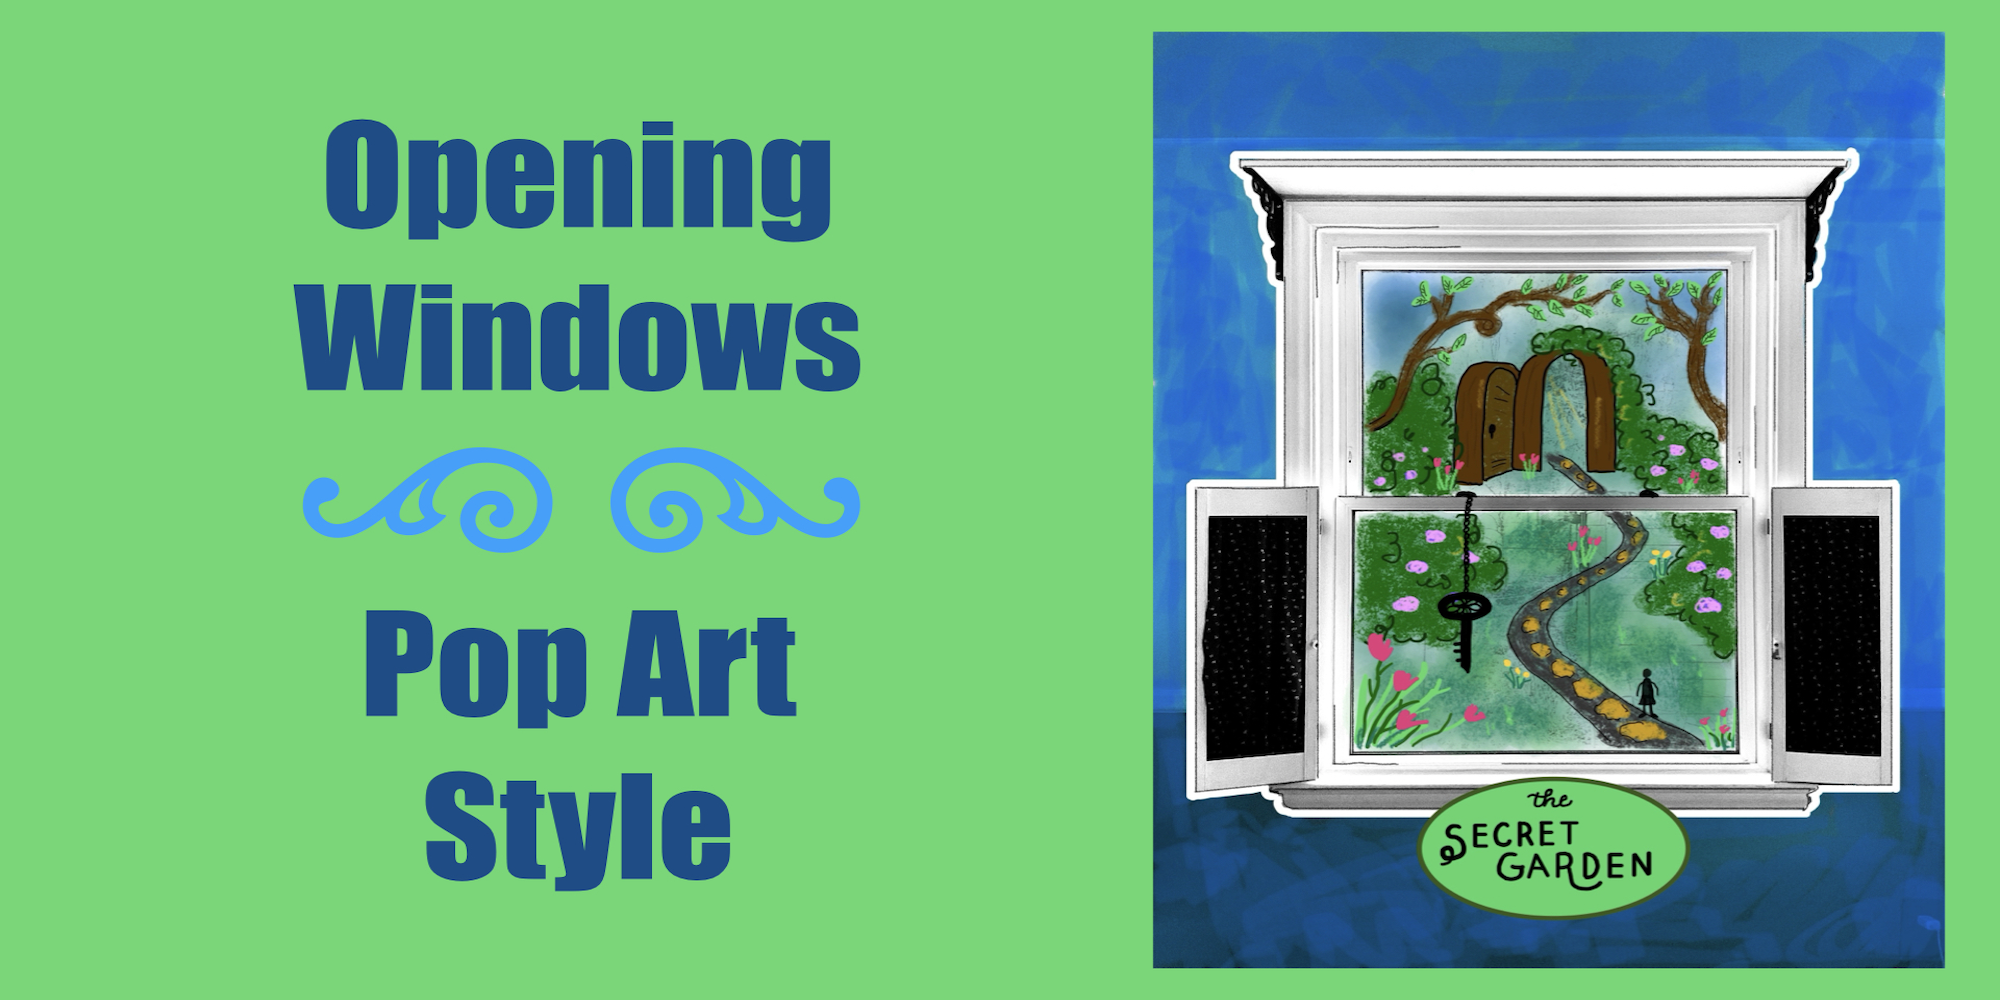 Opening Windows - Pop Art Style title with an illustration of the Secret Garden inside a window frame photo.